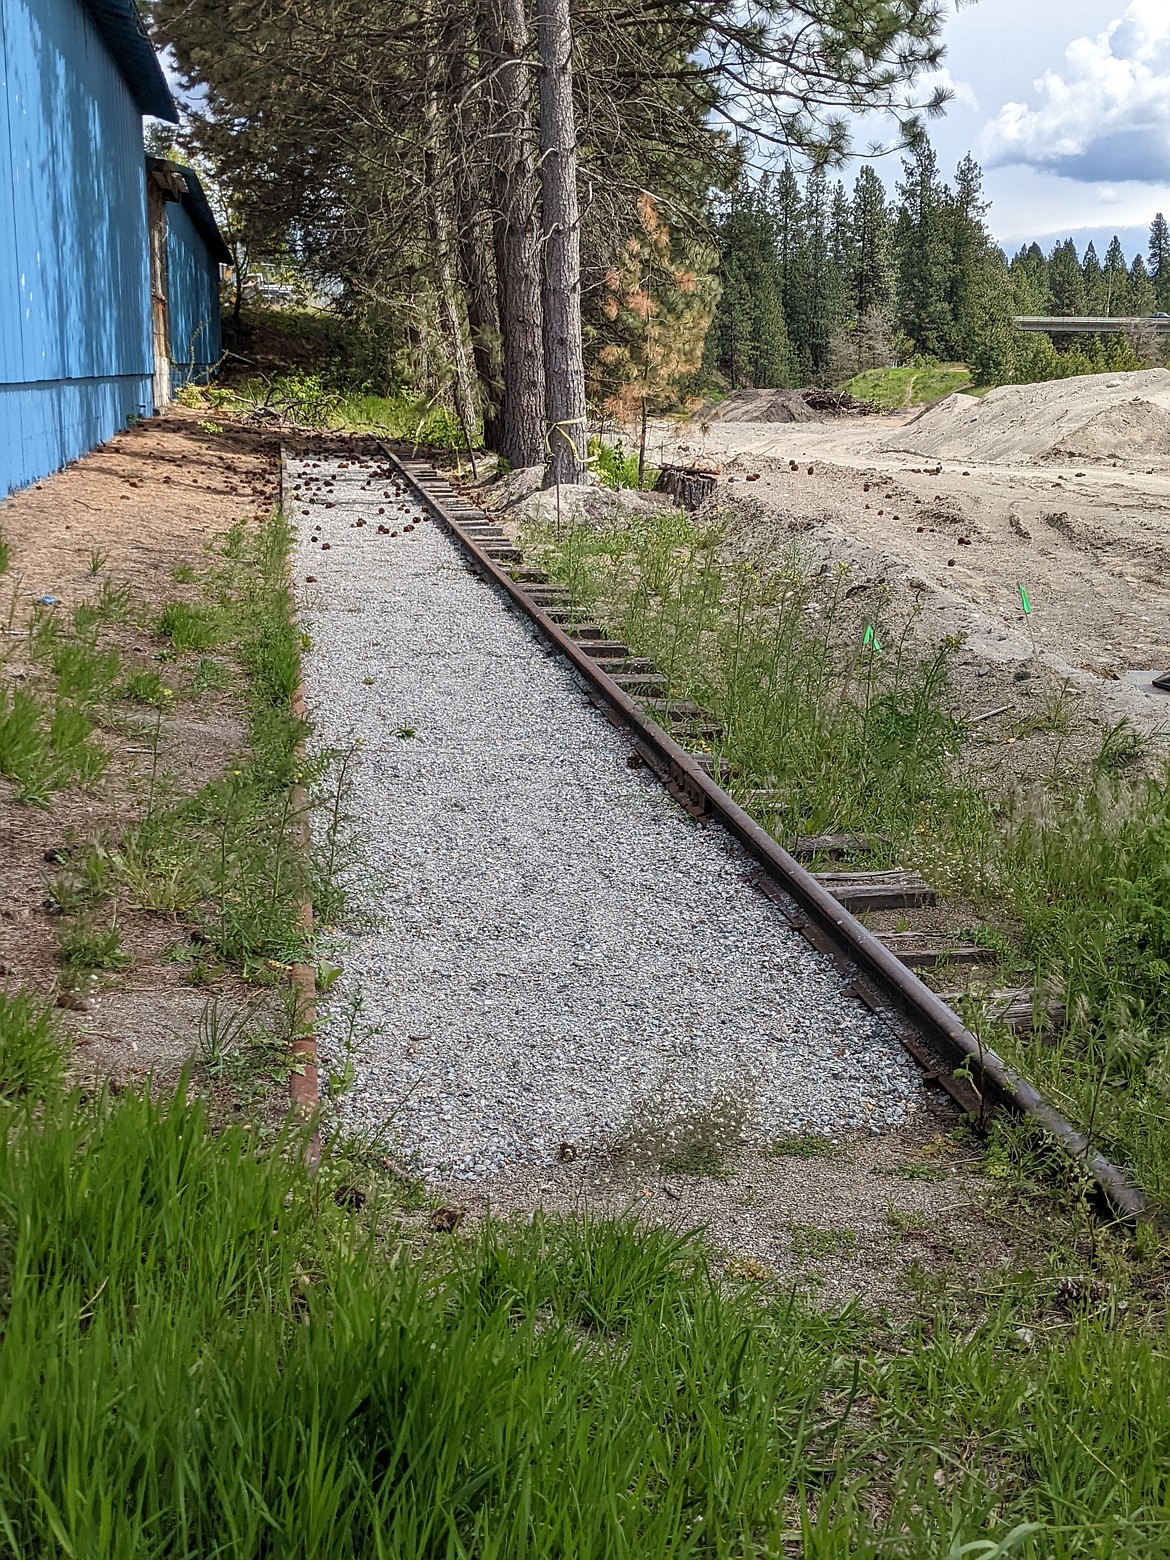 The 100 feet of visible railroad track behind the Hansens' property near Northwest Boulevard and Lacrosse Avenue. The tracks are believed to have been a part of the old Coeur d'Alene & Spokane Railroad Company.